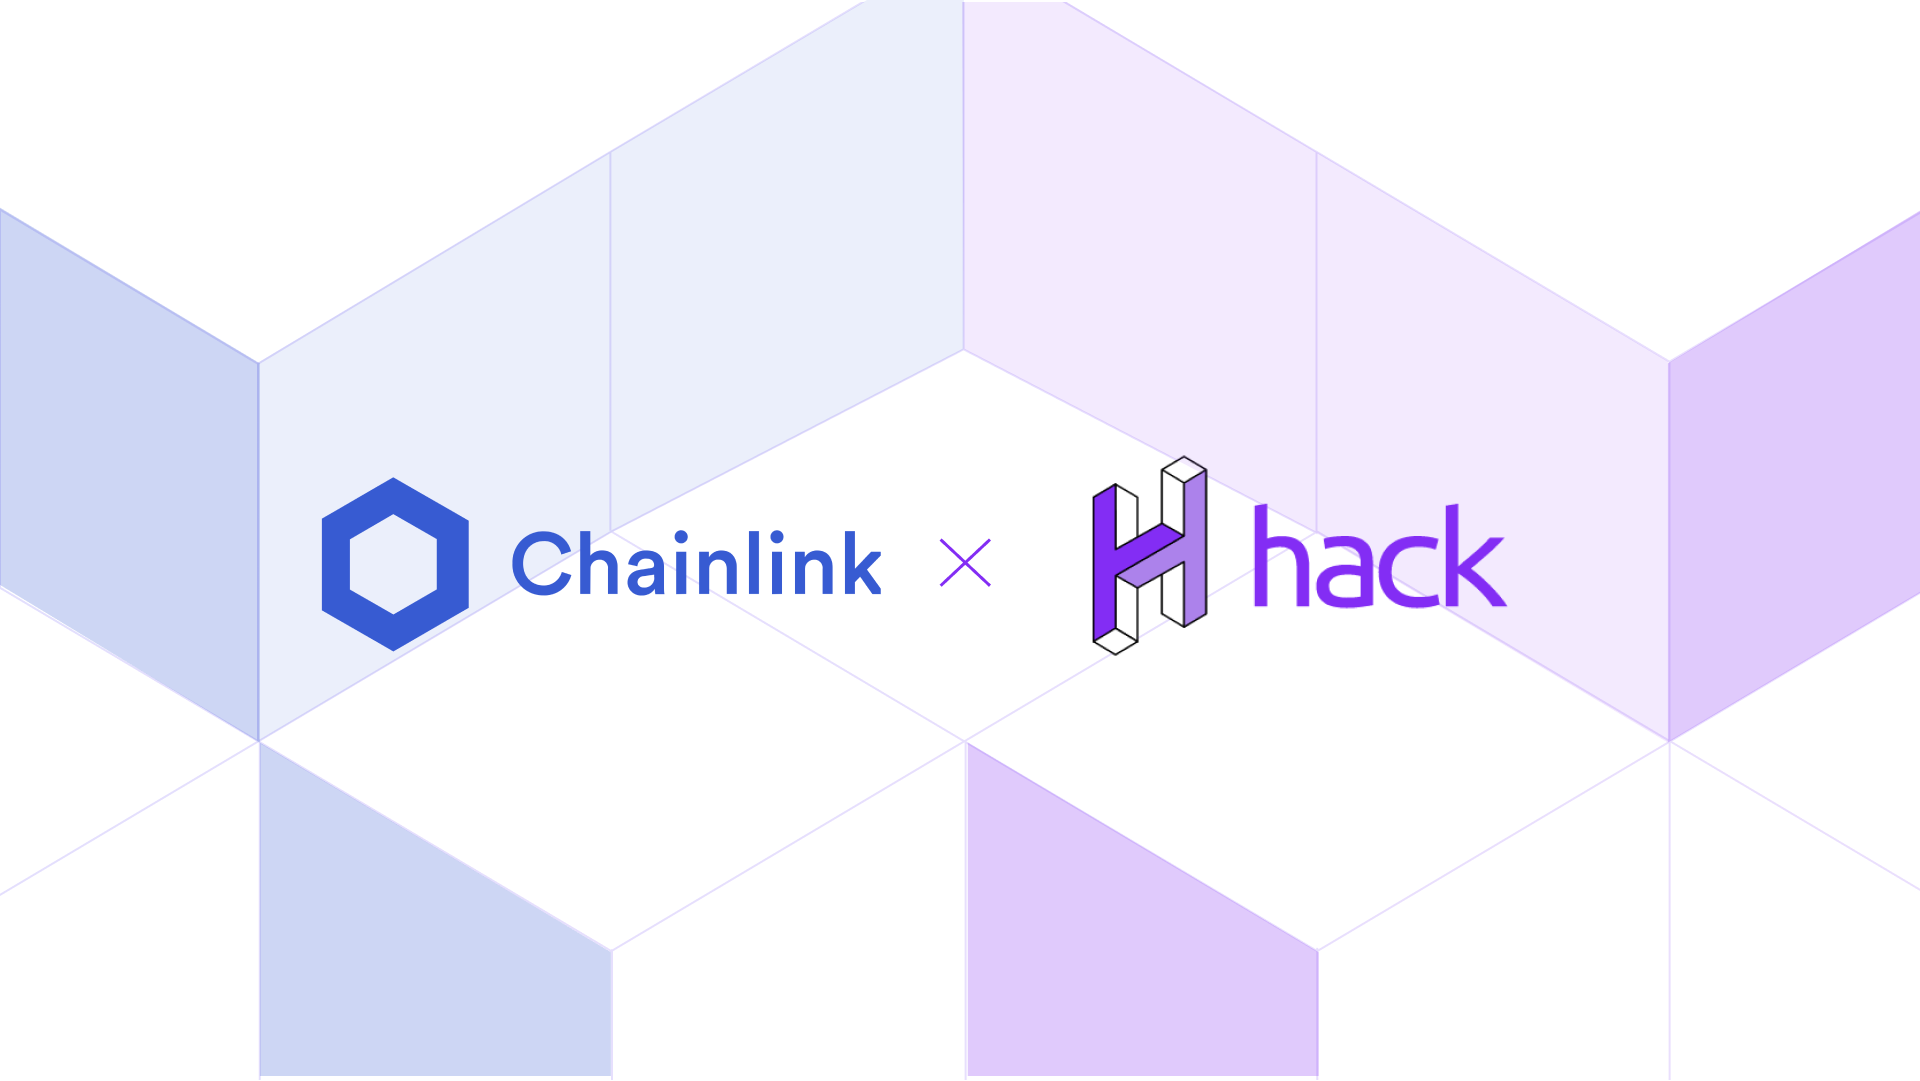 Cover Image for hack is Awarded Chainlink Grant to Develop Gas-Efficient, Open-Source NFT Templates Using Chainlink Keepers and Chainlink VRF